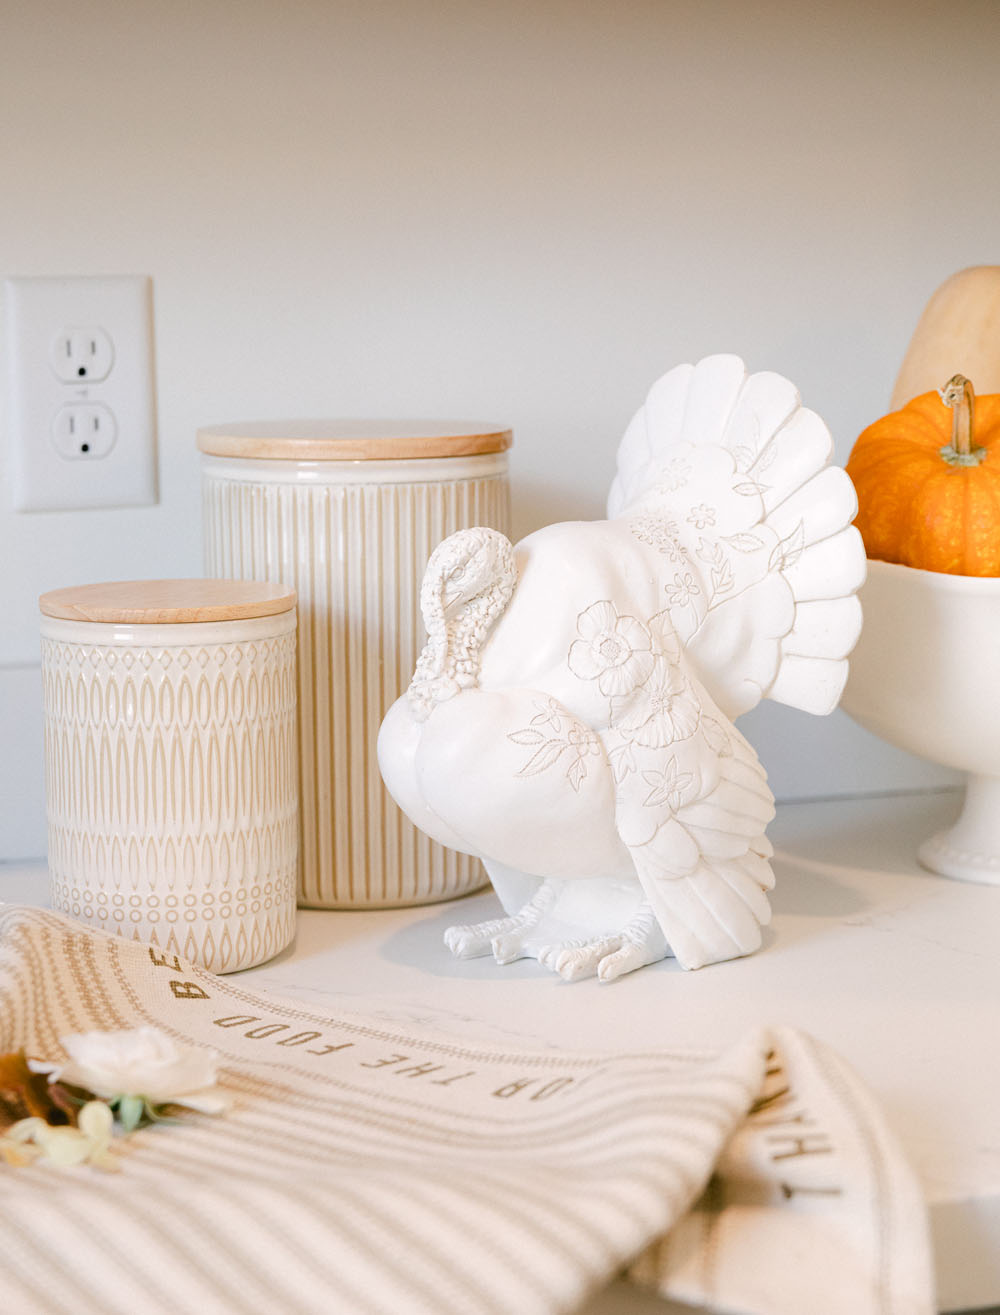 How to style a Thanksgiving Day dinner at home with Bonjour Fete